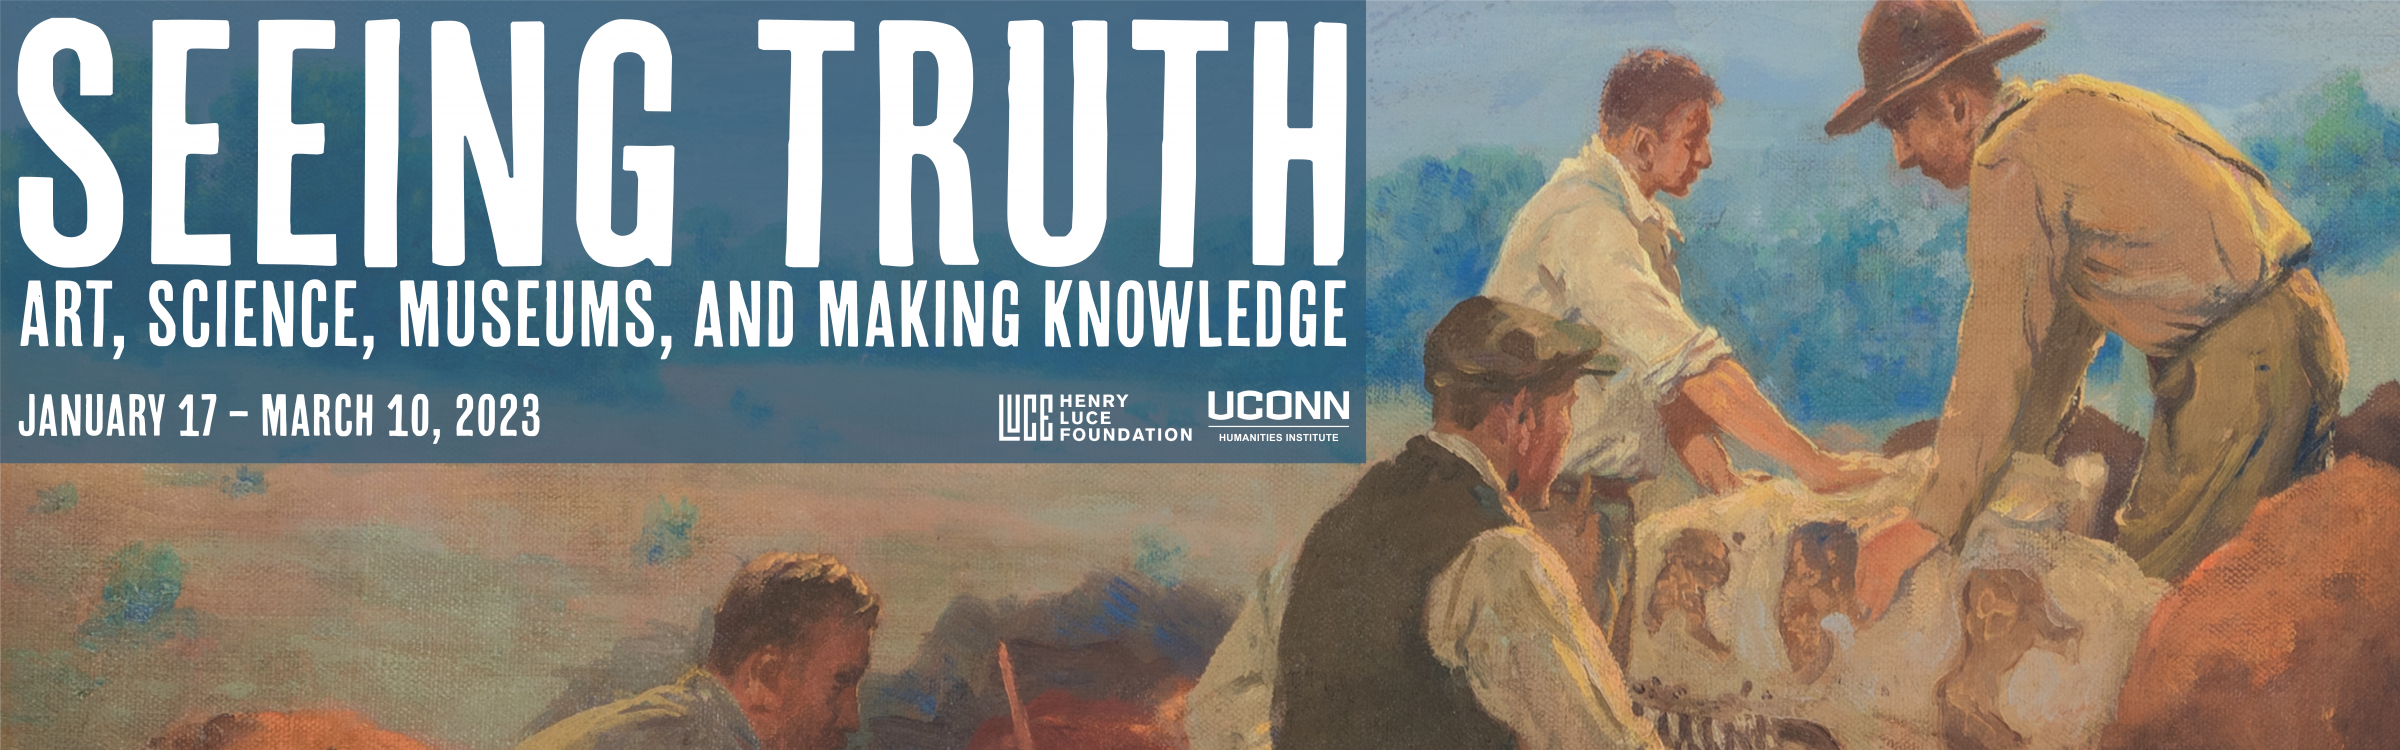 Promotional Banner for "Seeing Truth: Art, Science, Museums, and Making Knowledge" Exhibition